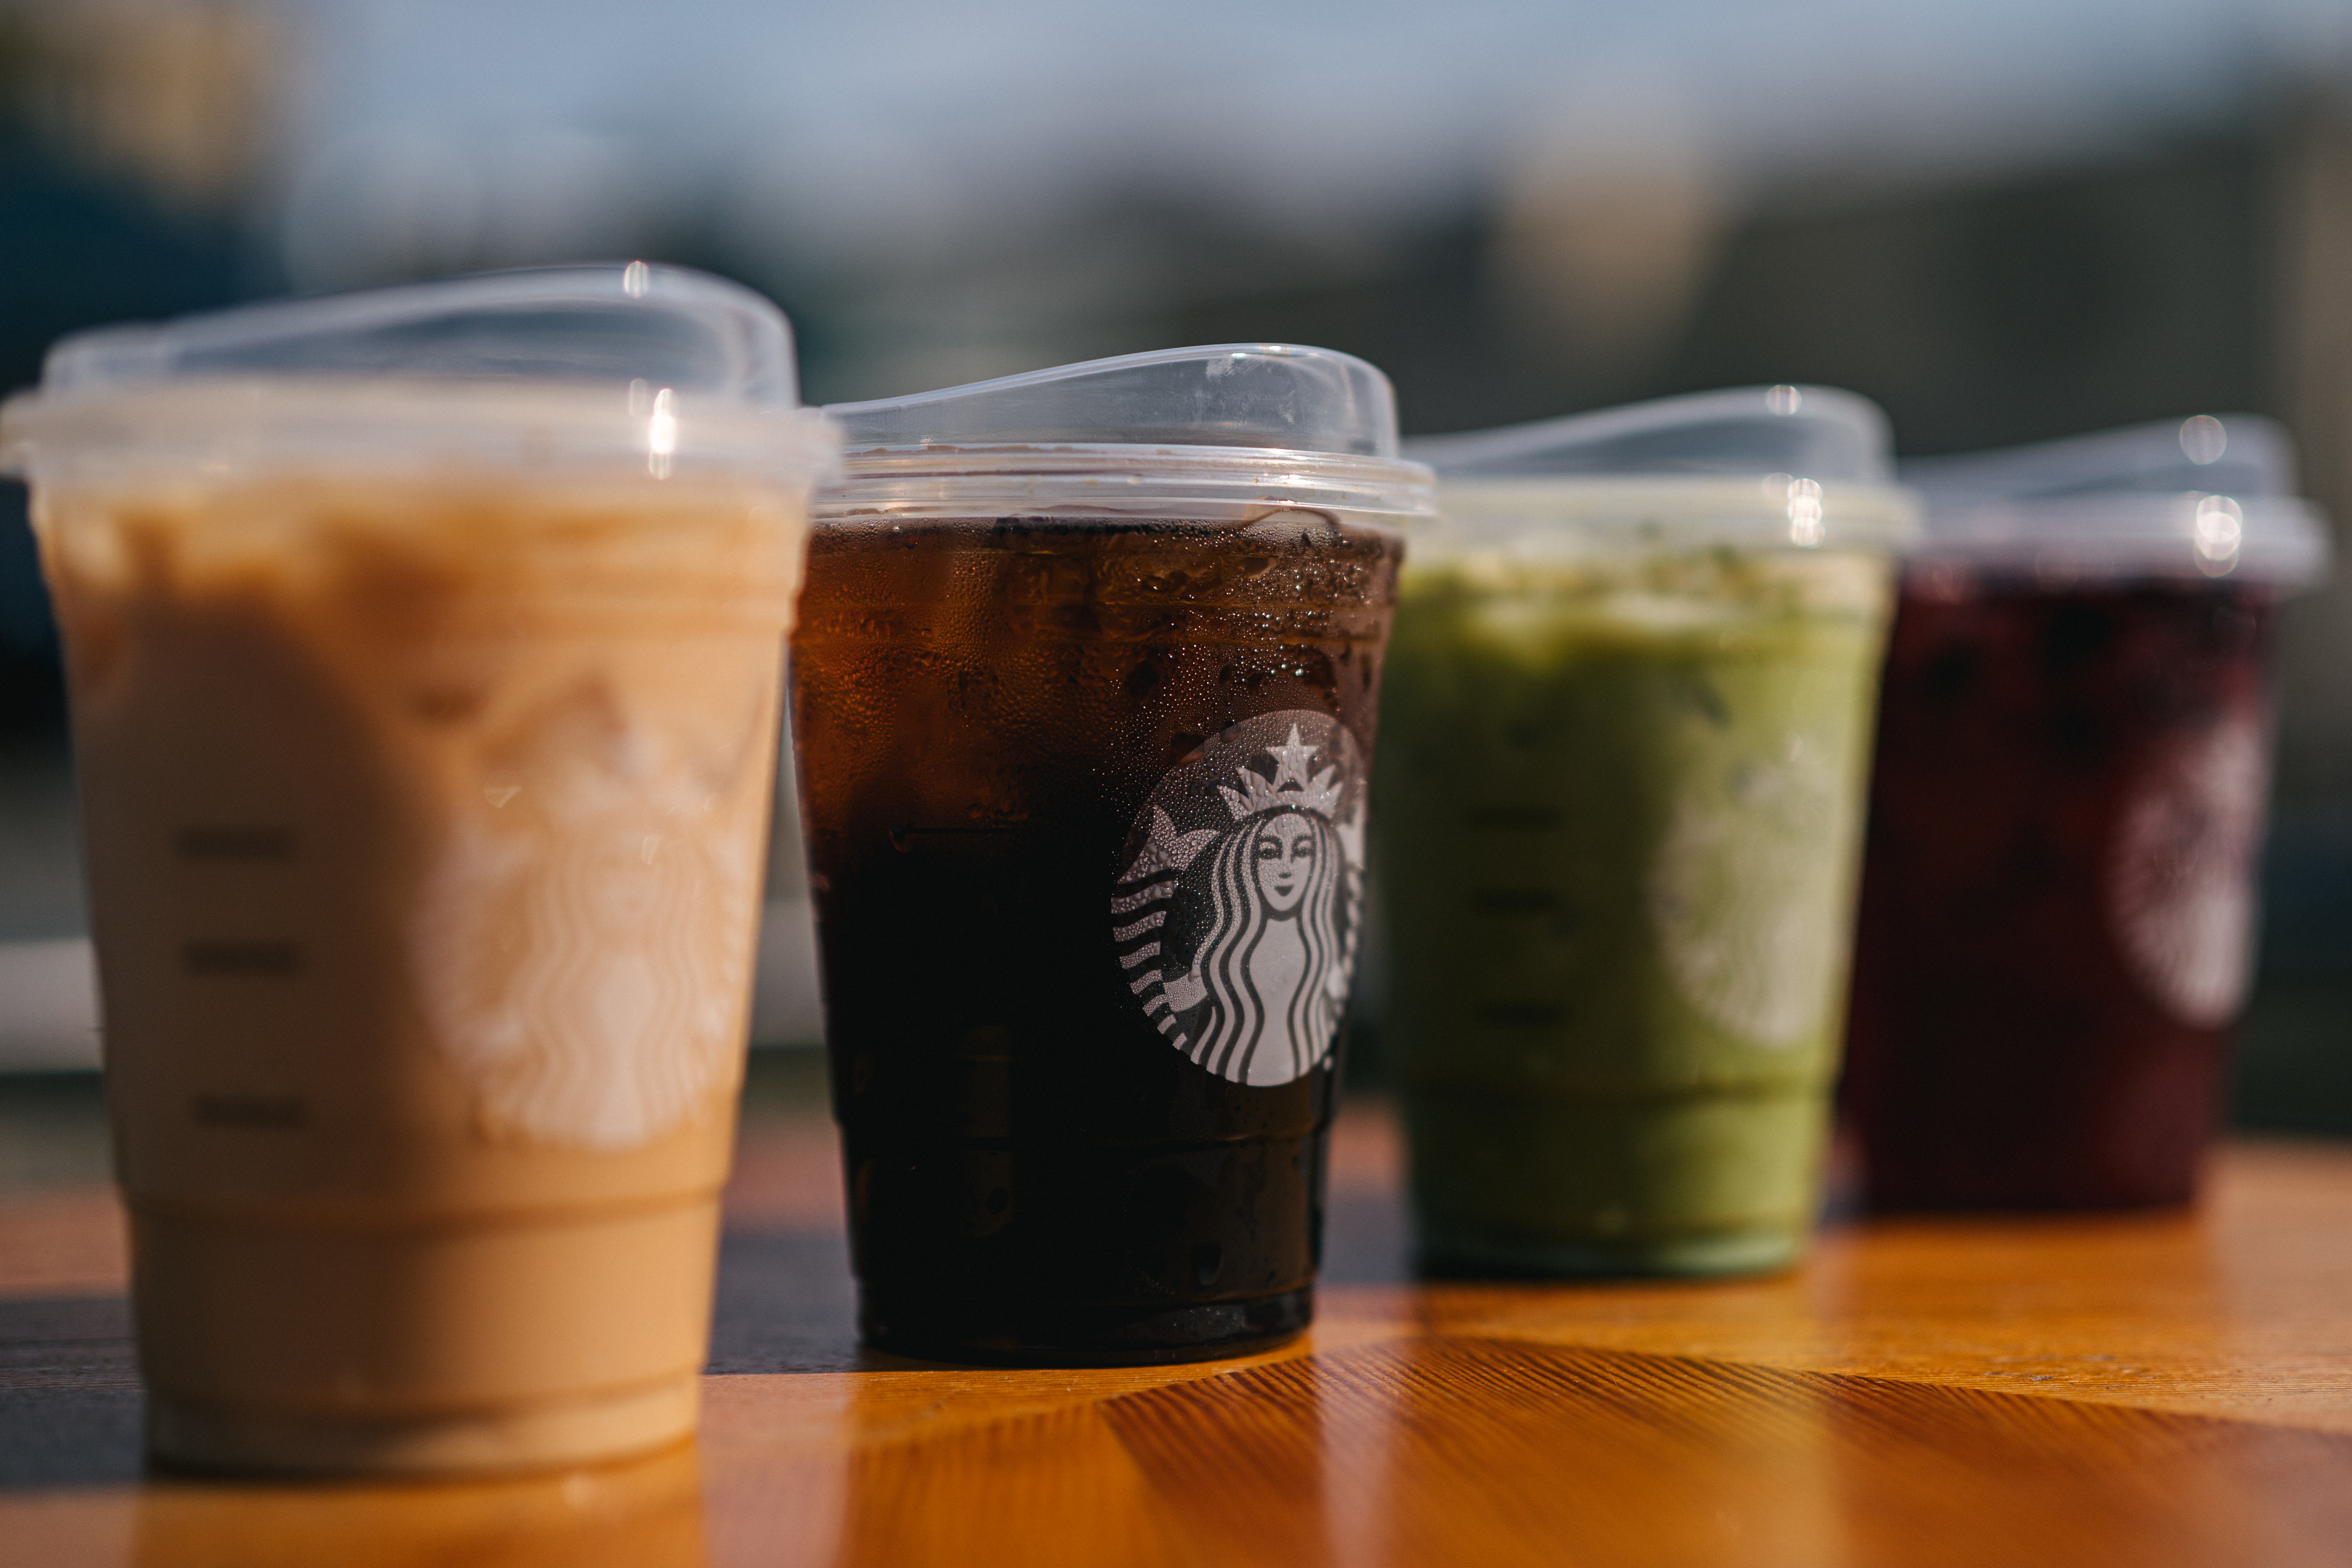 Here's The Deal With Starbucks' Strawless Lids